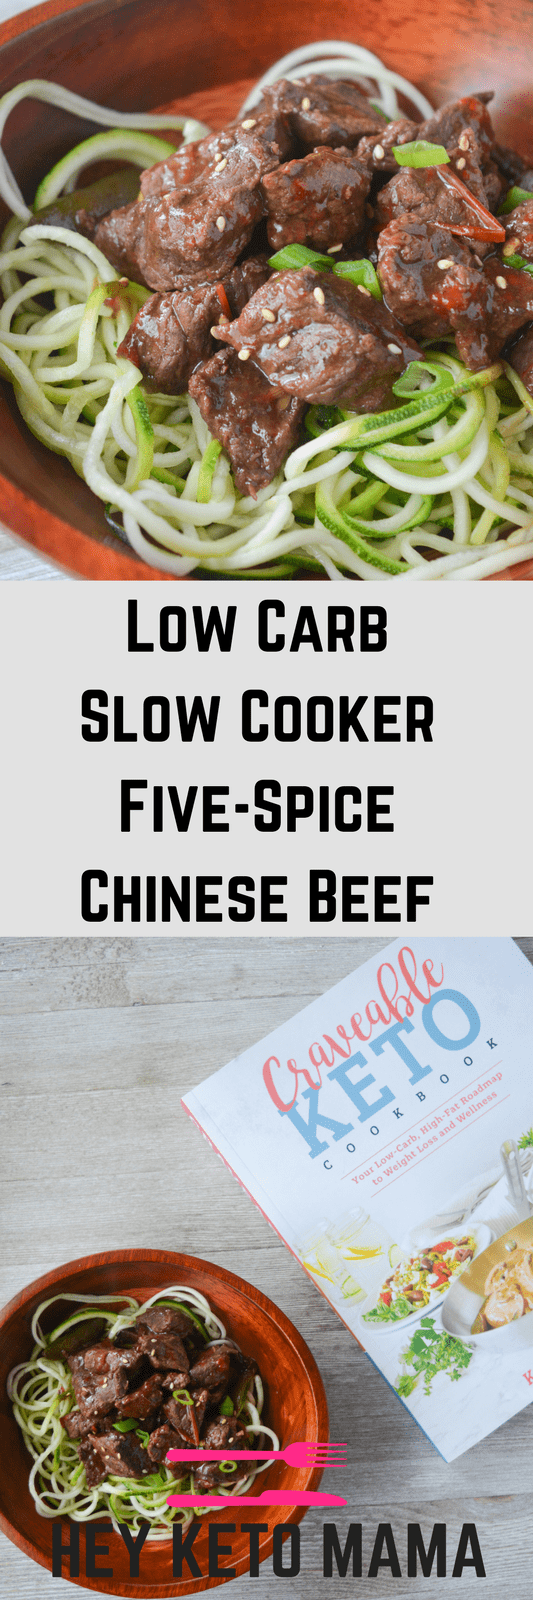 Fresh grated ginger, red peppers, and minced garlic are all part of this Low Carb Slow Cooker Chinese Five-Spice Beef, a savory dish that will satisfy your Asian-style cuisine cravings! | heyketomama.com